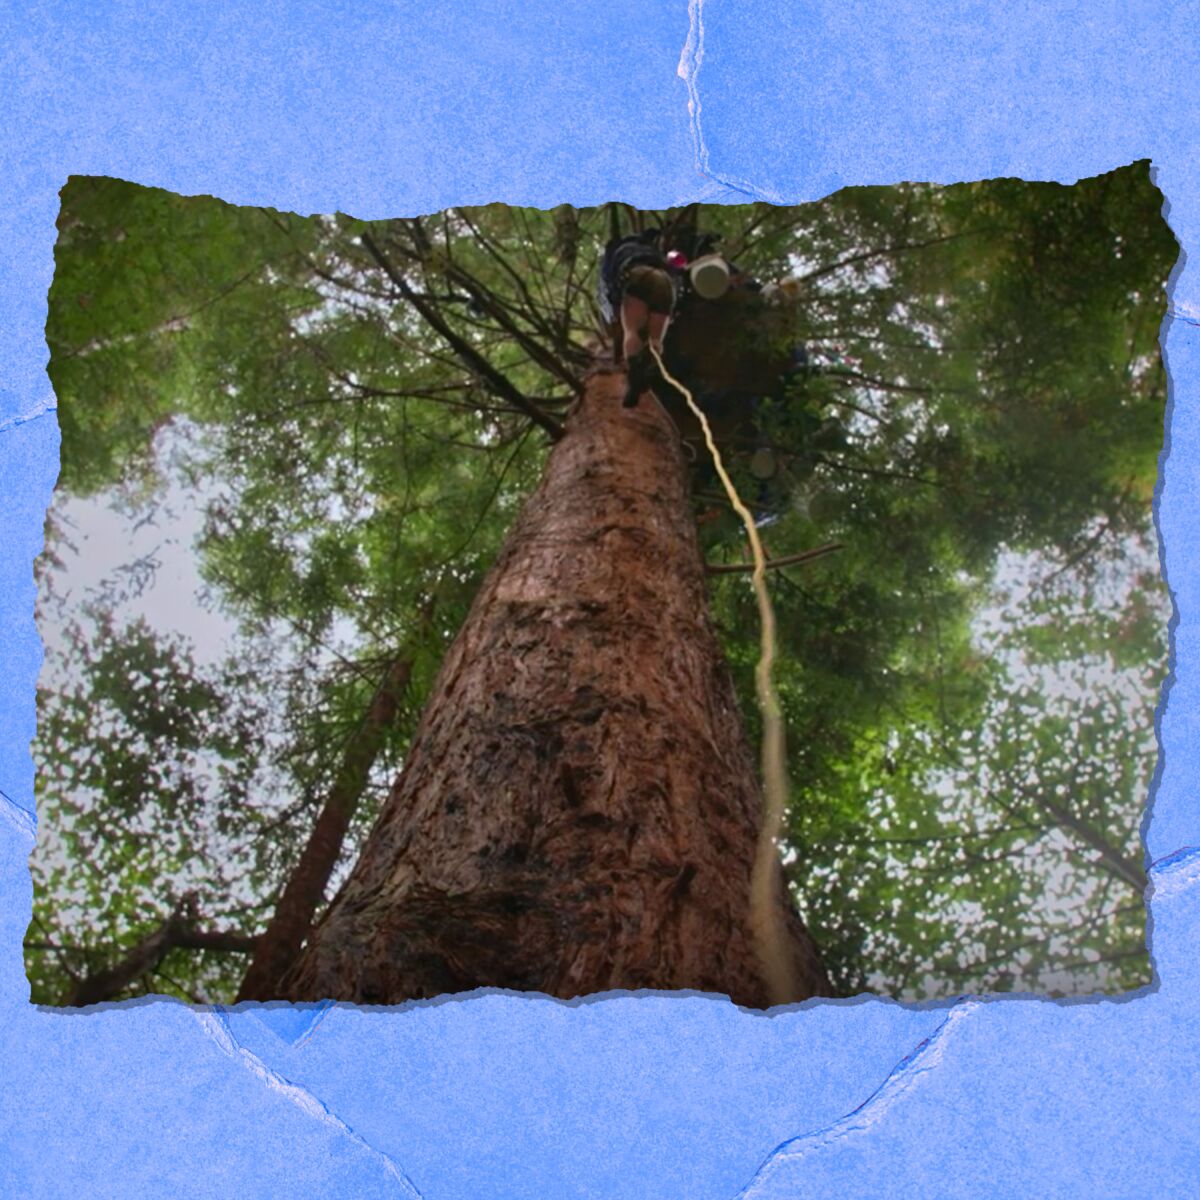 Seen from below, a person on a long yellow rope on a redwood tree.